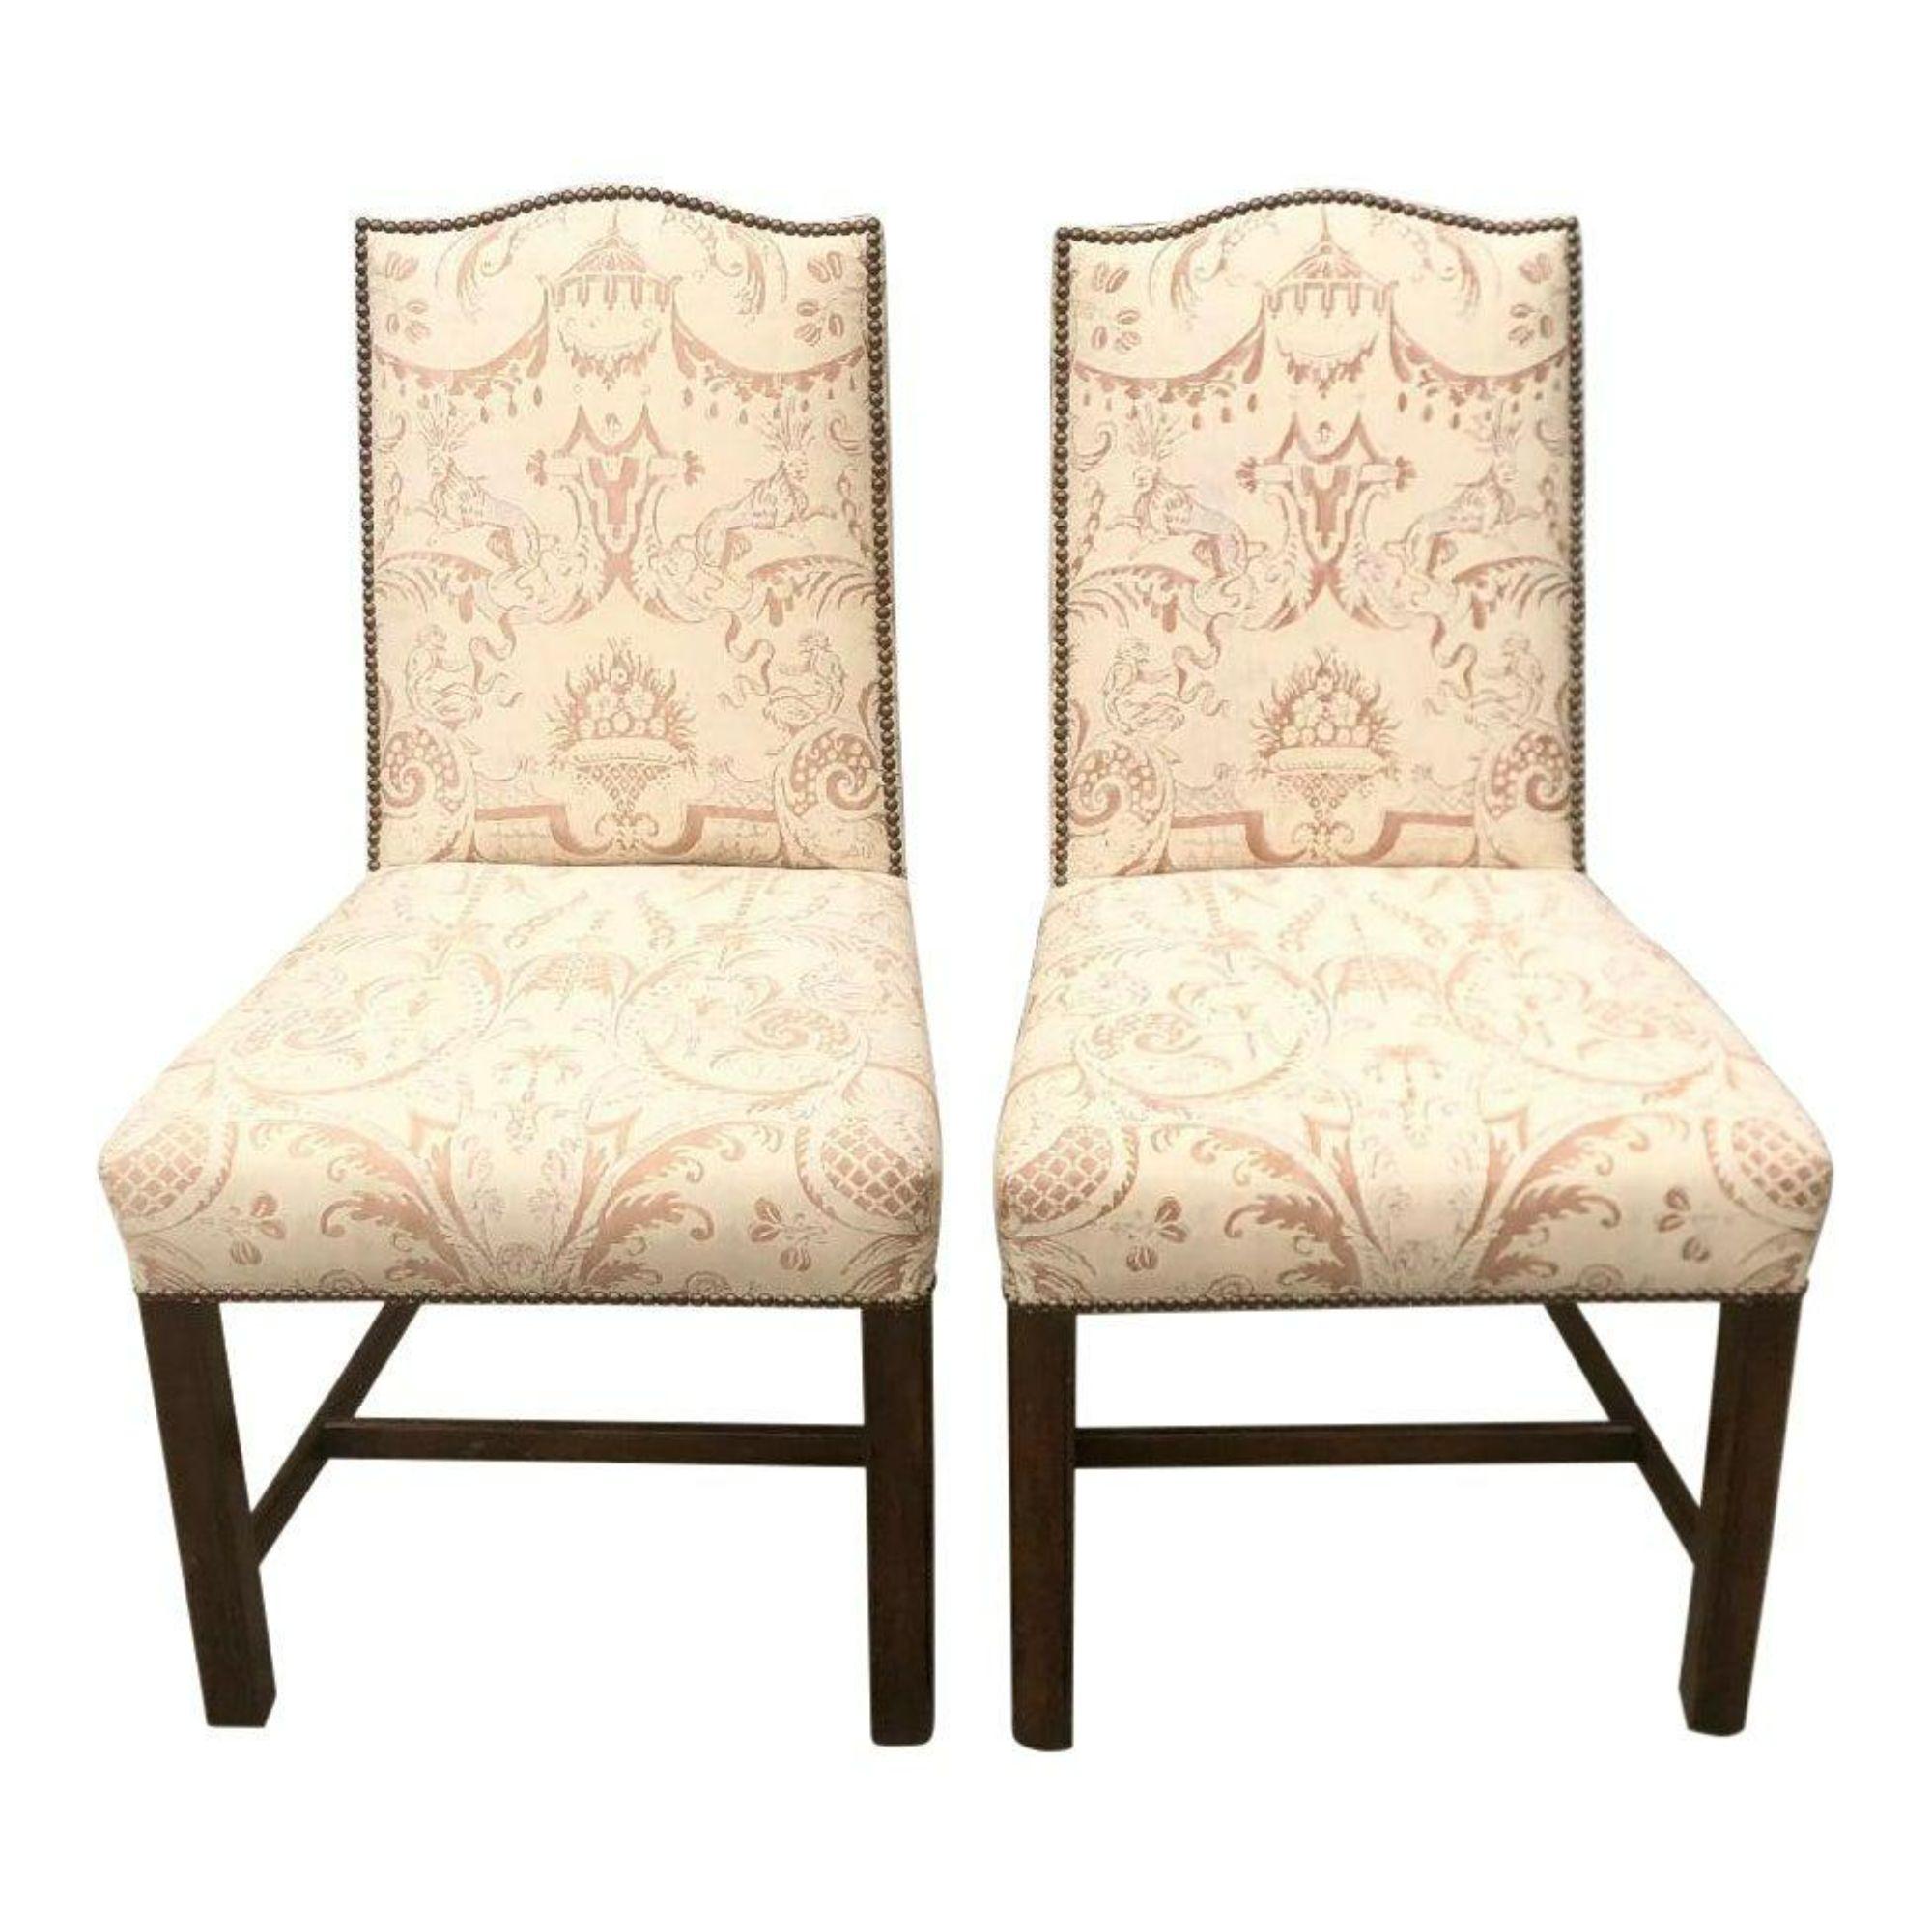 Italian Fortuny Upholstered Antique Chinese Chippendale Designer Chair For Sale